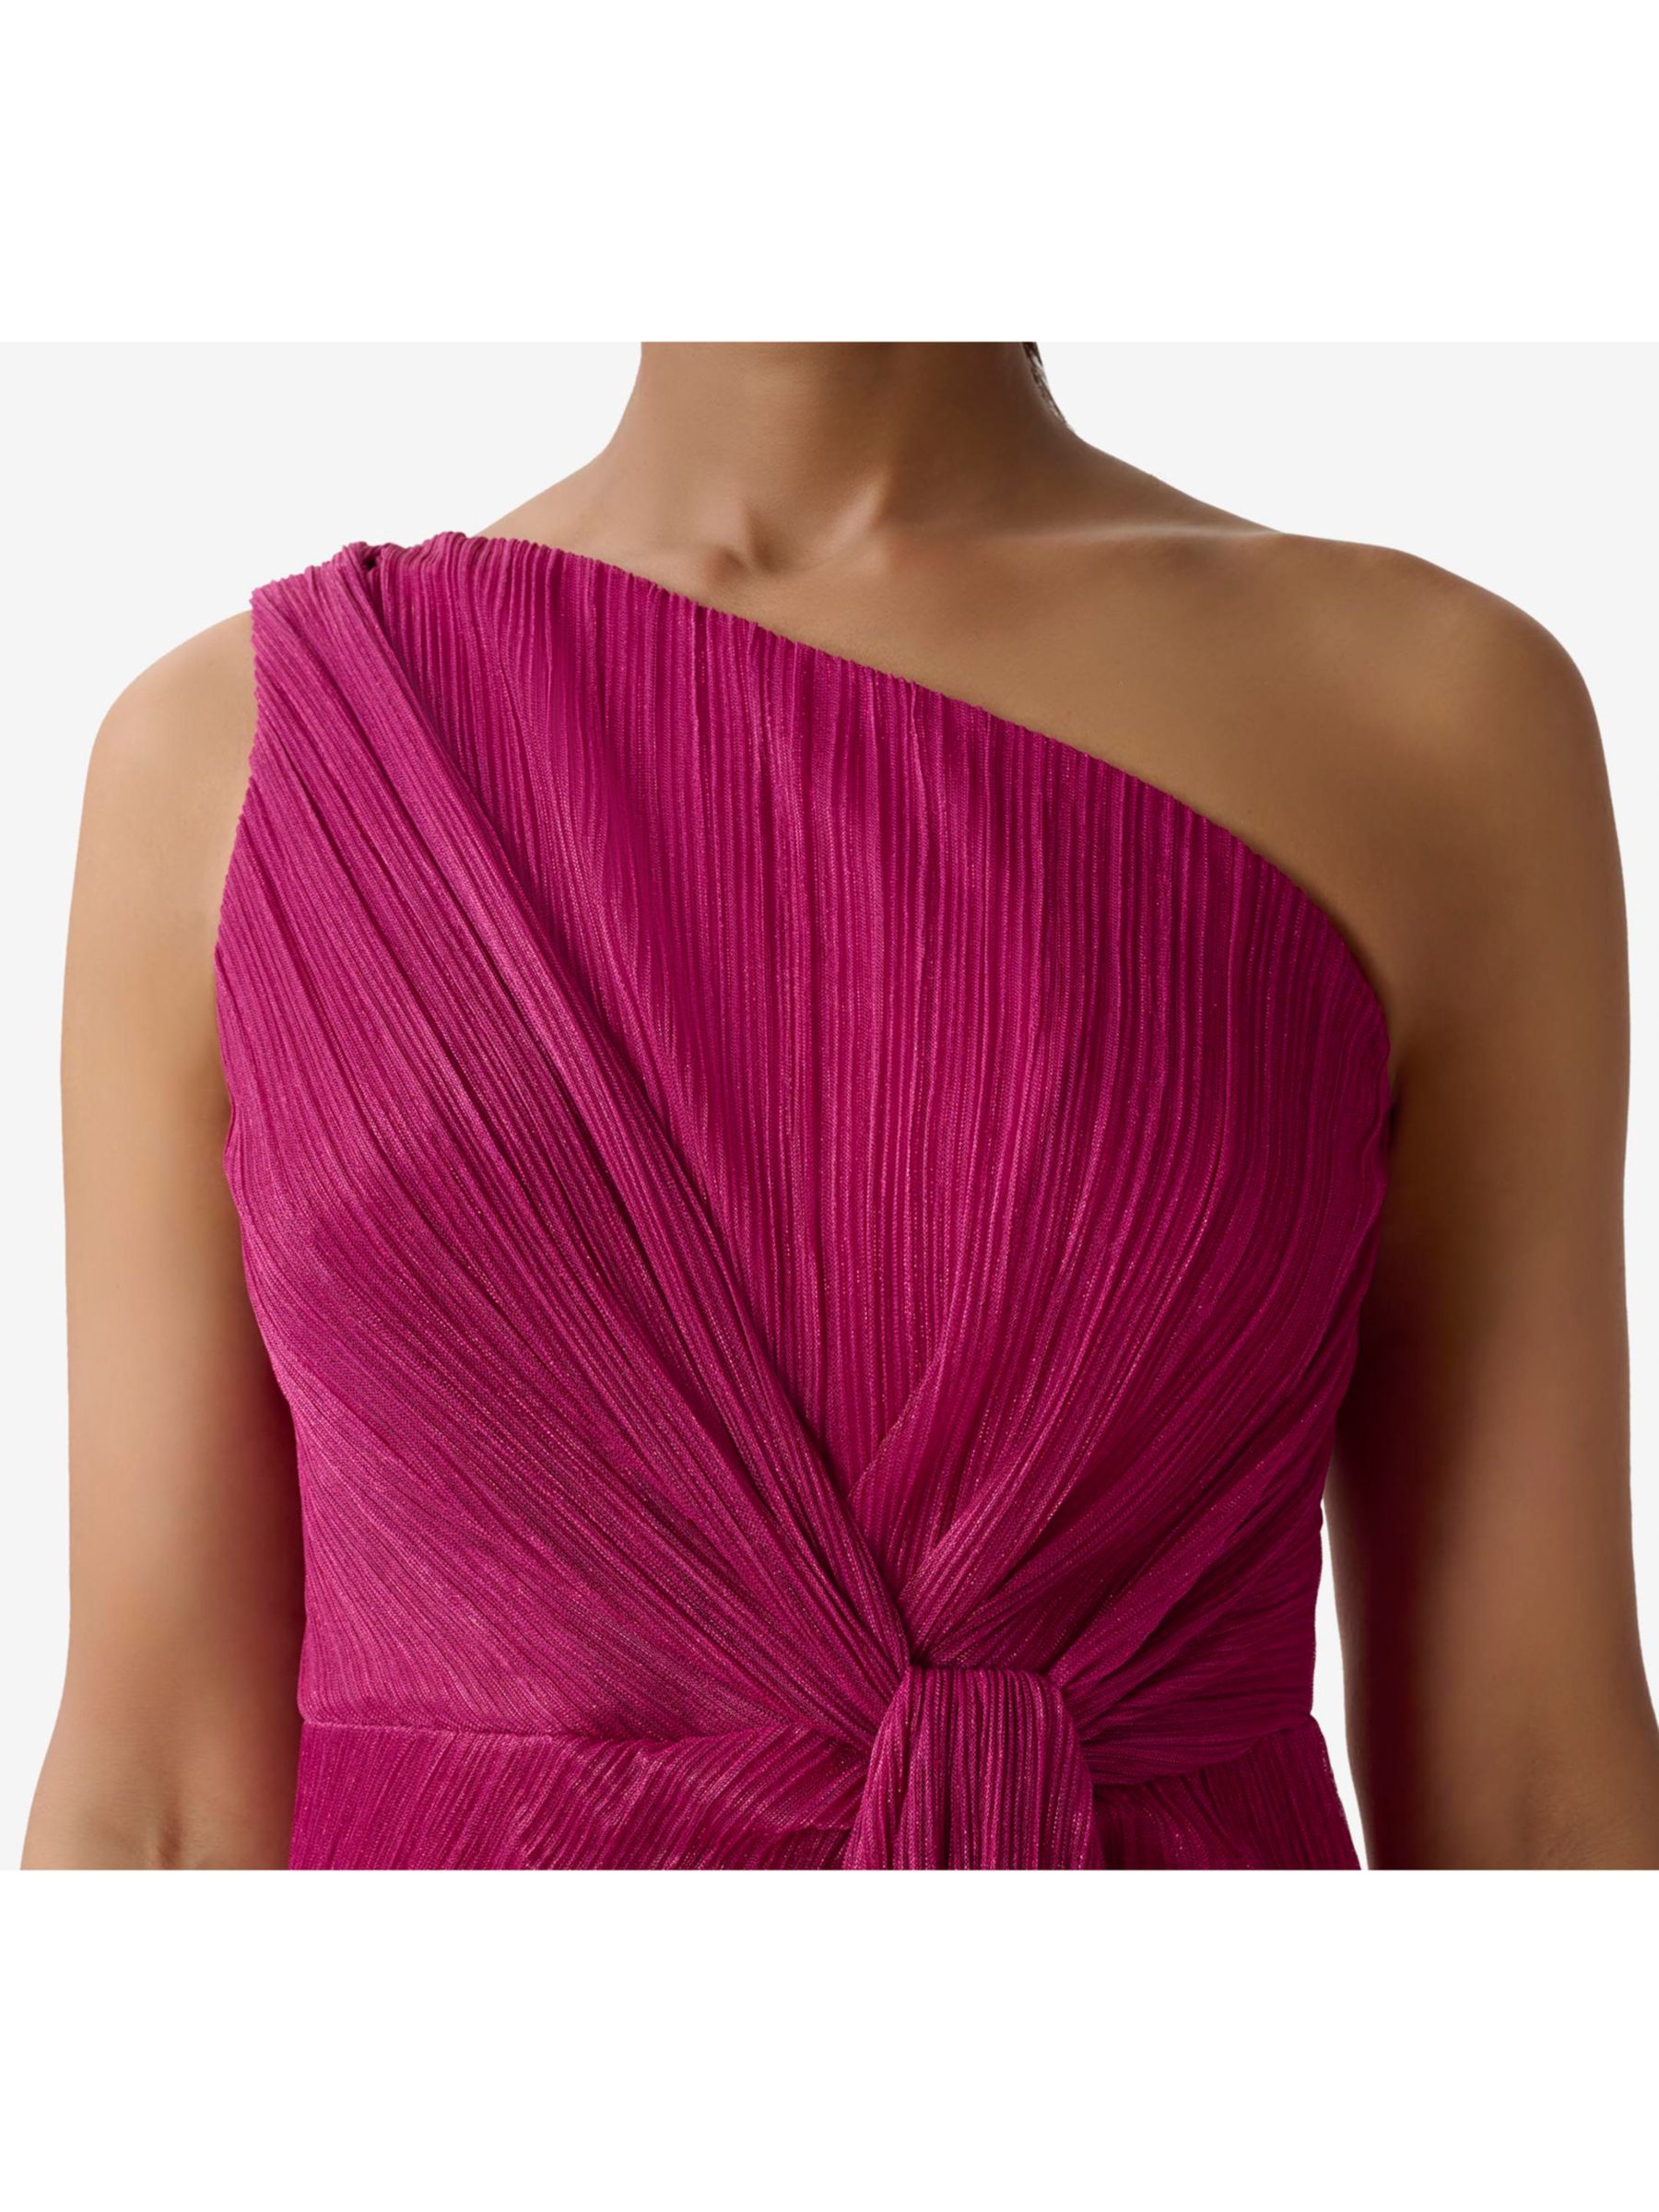 Buy Adrianna Papell Stardust One Shoulder Maxi Dress, Magenta Online at johnlewis.com